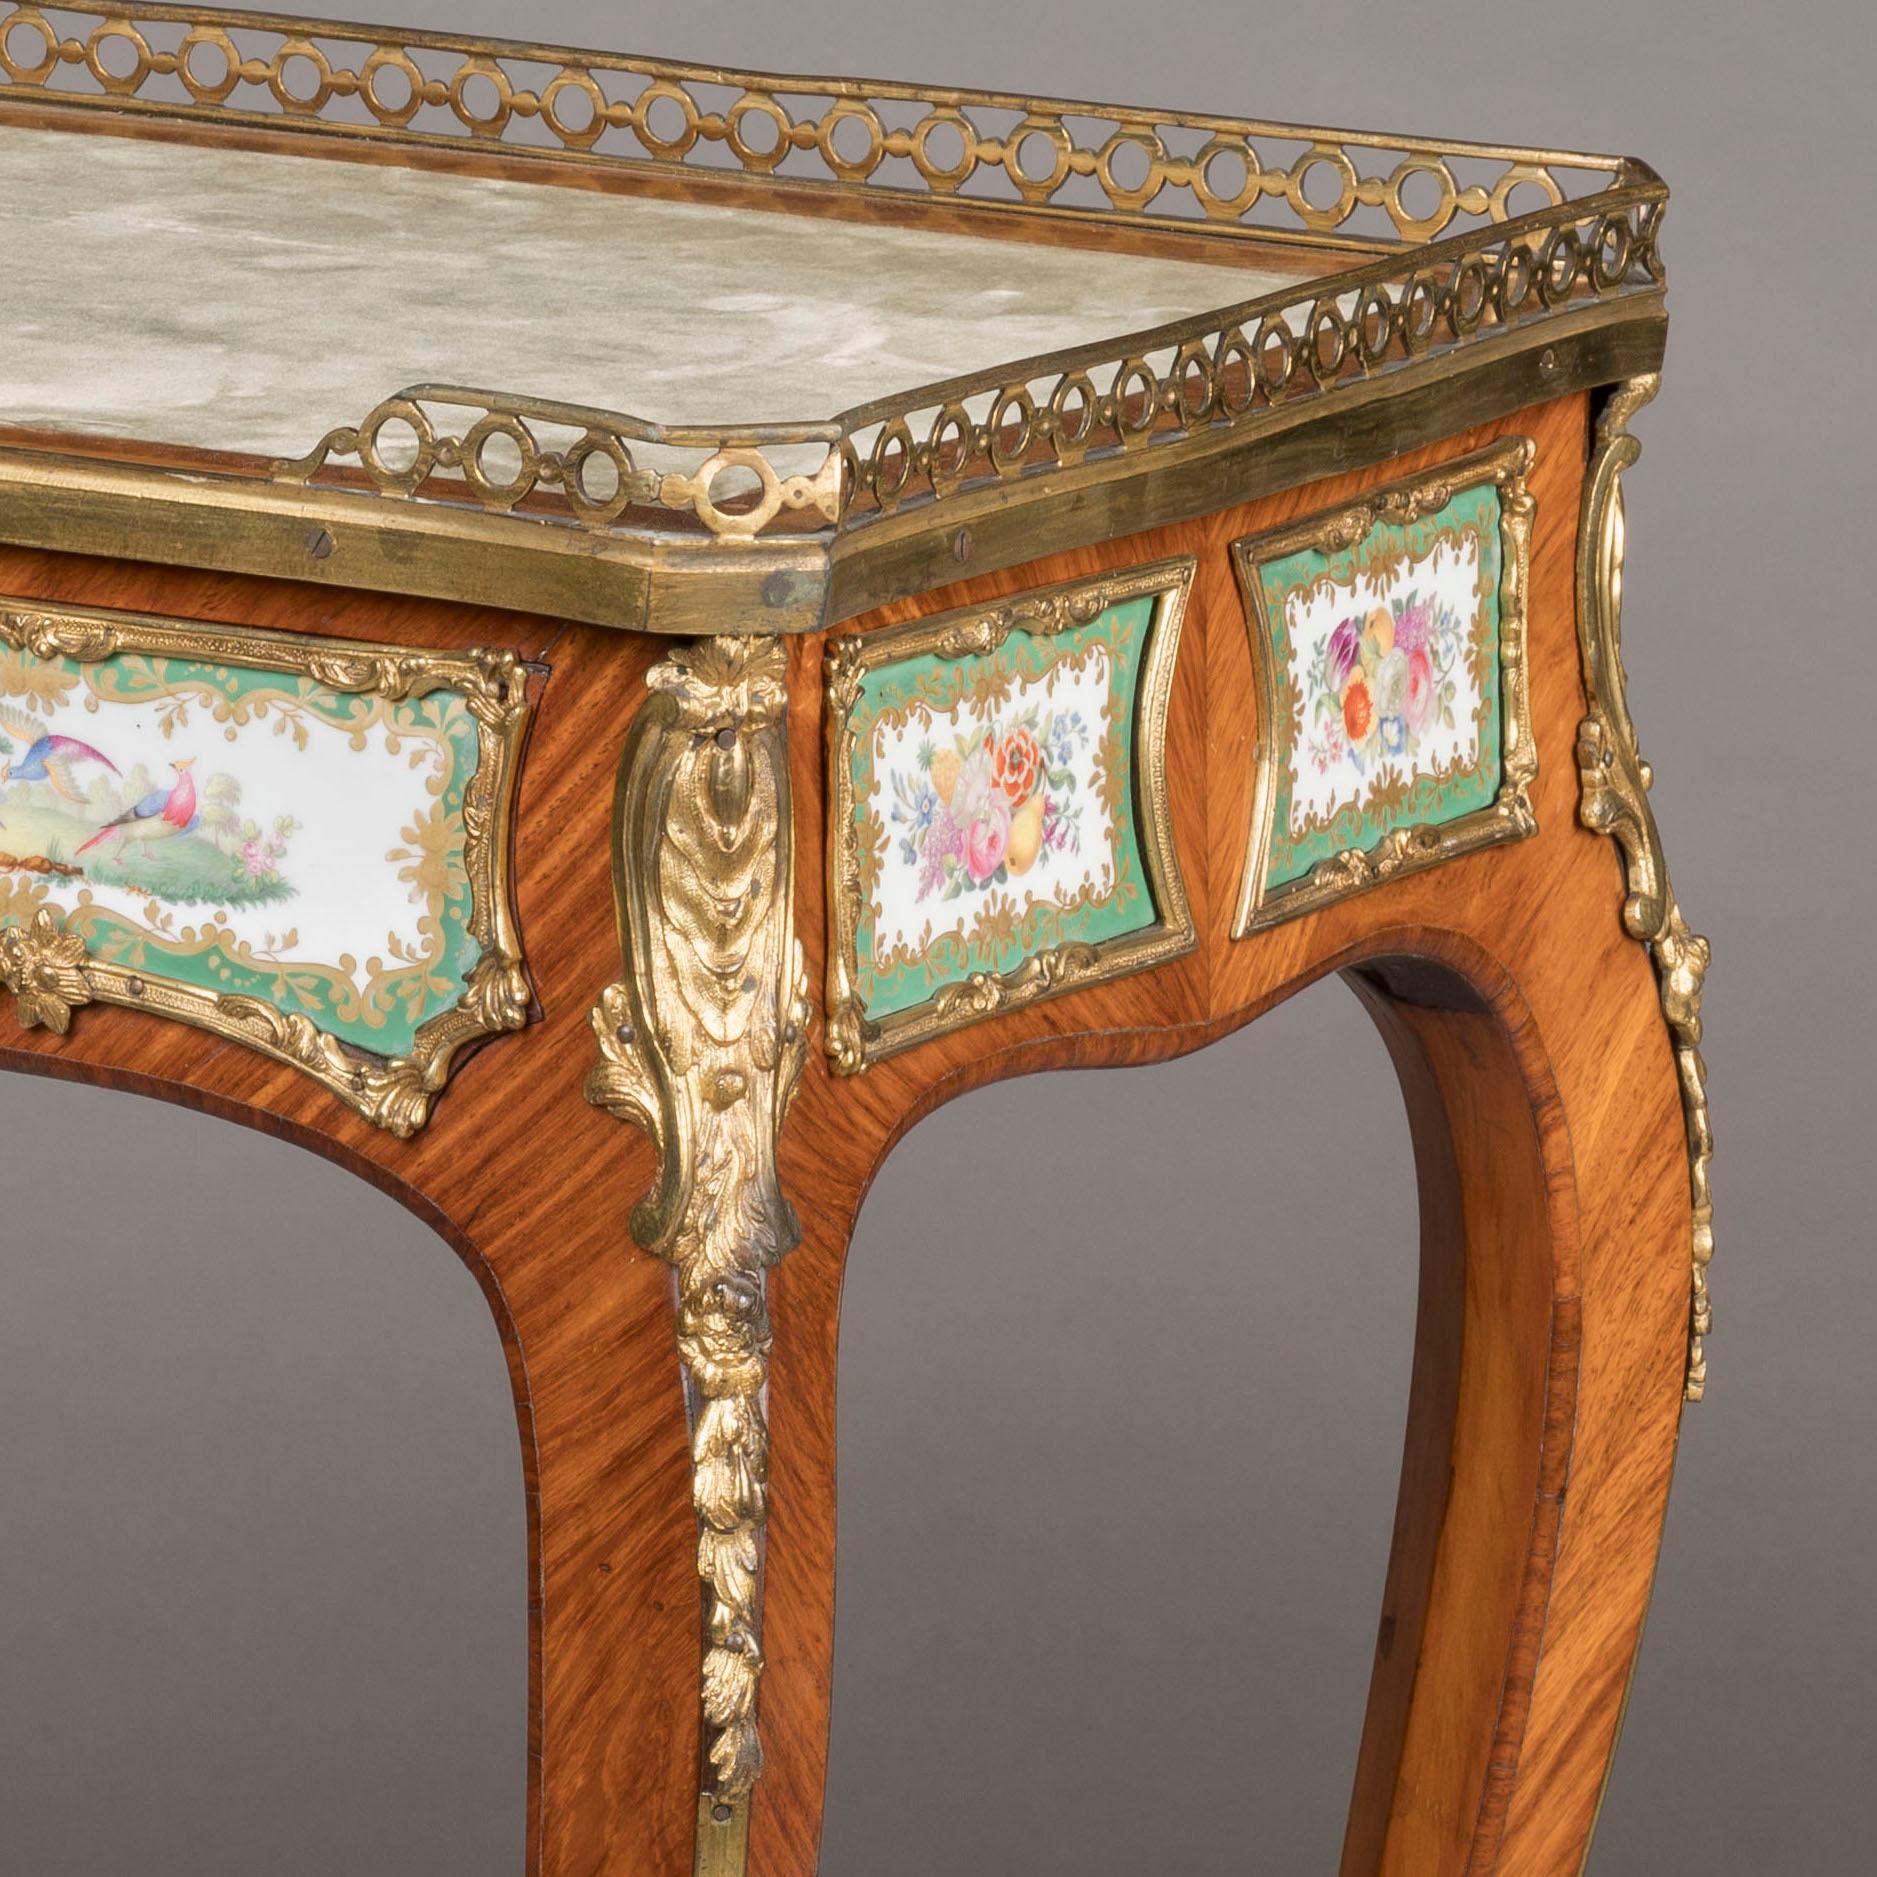 19th Century French Porcelain-Mounted Occasional Table in the Louis XV/XVI Style For Sale 3